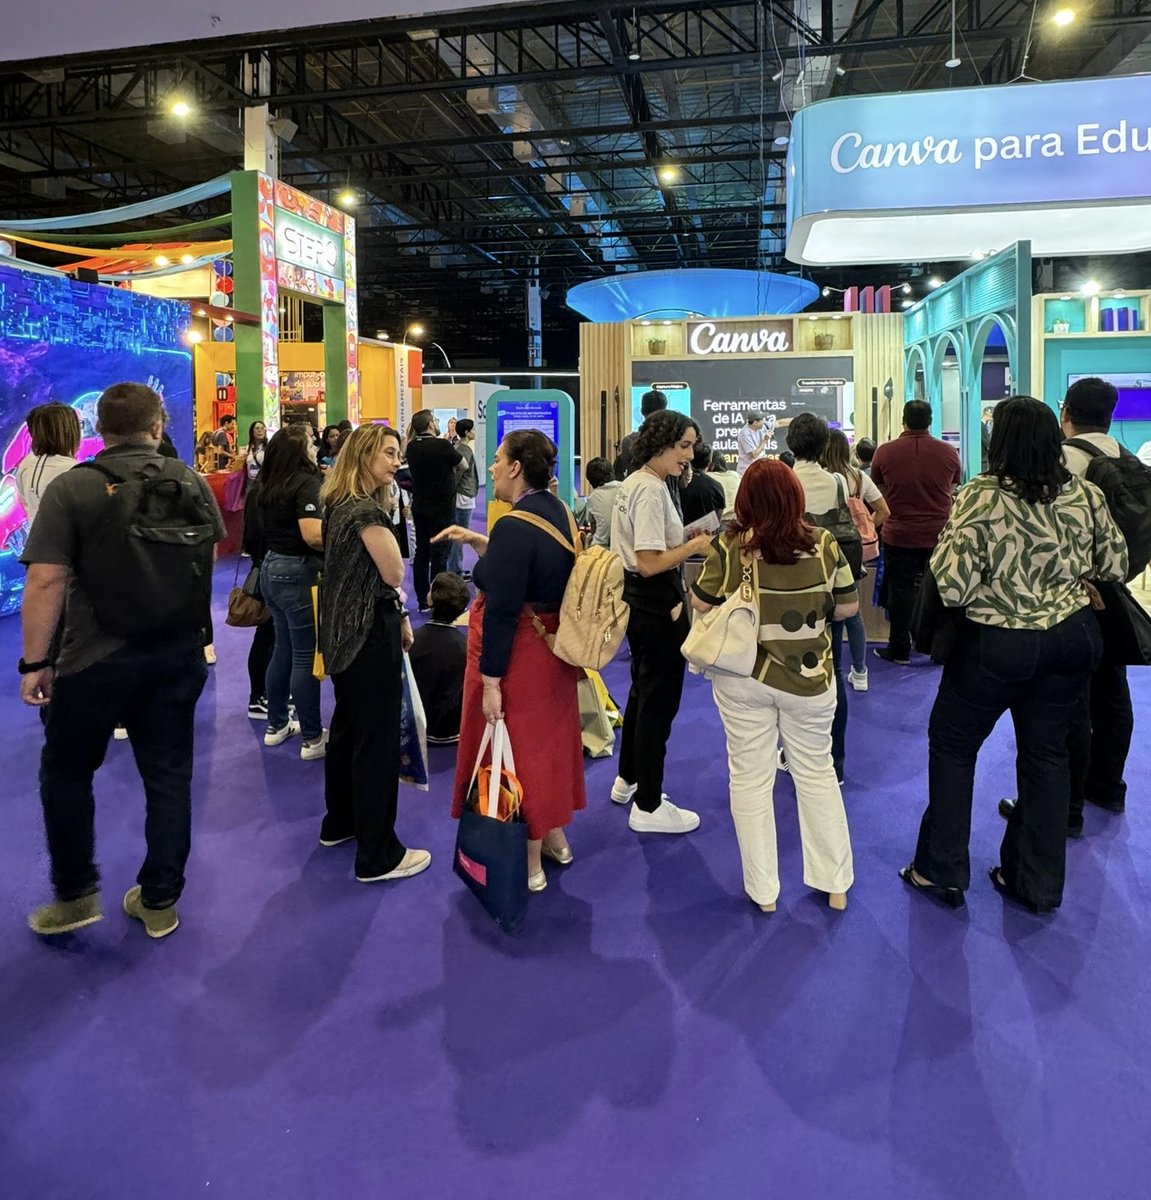 The learning continues at the #CanvaEDU booth at @BETT_show Brazil! Stop by each hour and be amazed at the creative possibilities!